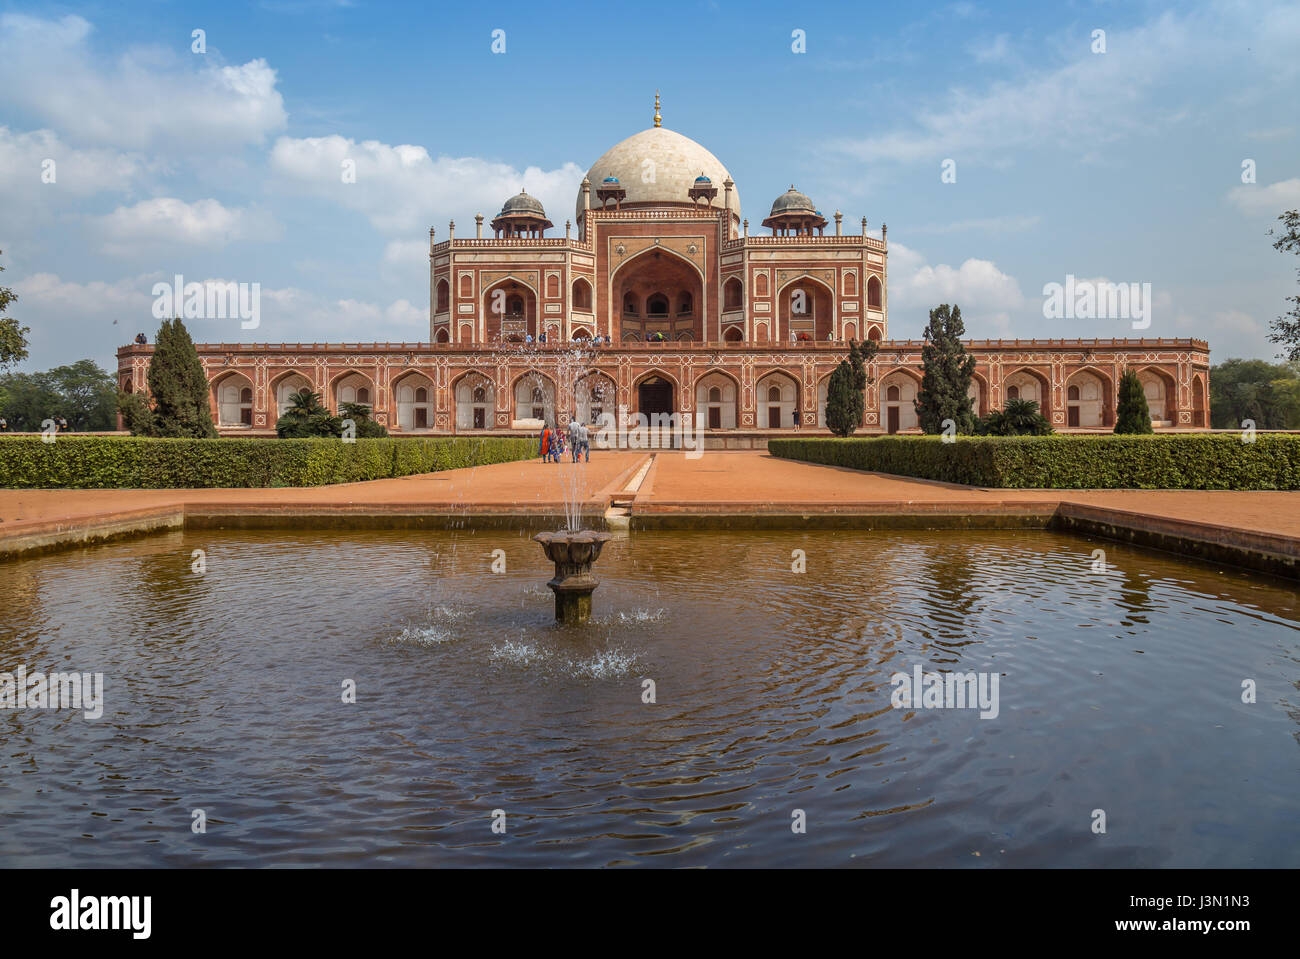 Humayun tomb in Delhi - A mughal architecture masterpiece in India designated as the UNESCO world heritage site. Stock Photo